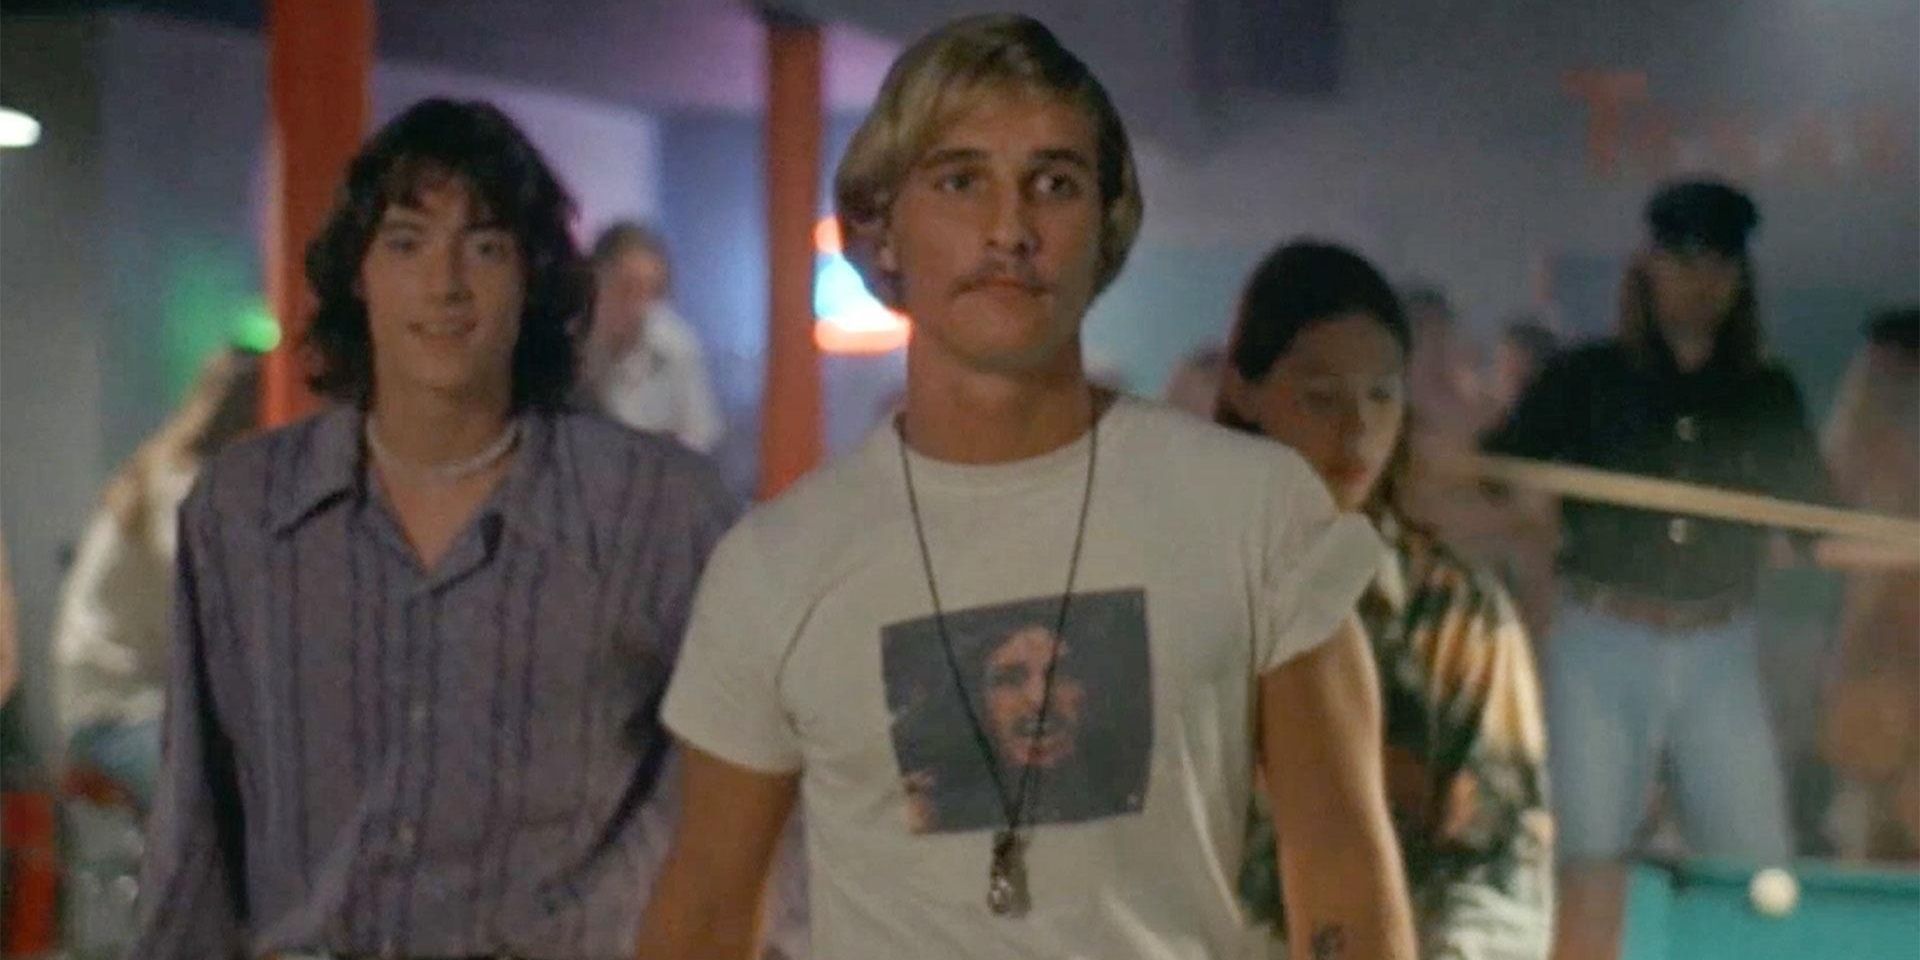 Wooderson, Pink, and Mitch walk into the Emporium in Dazed and Confused